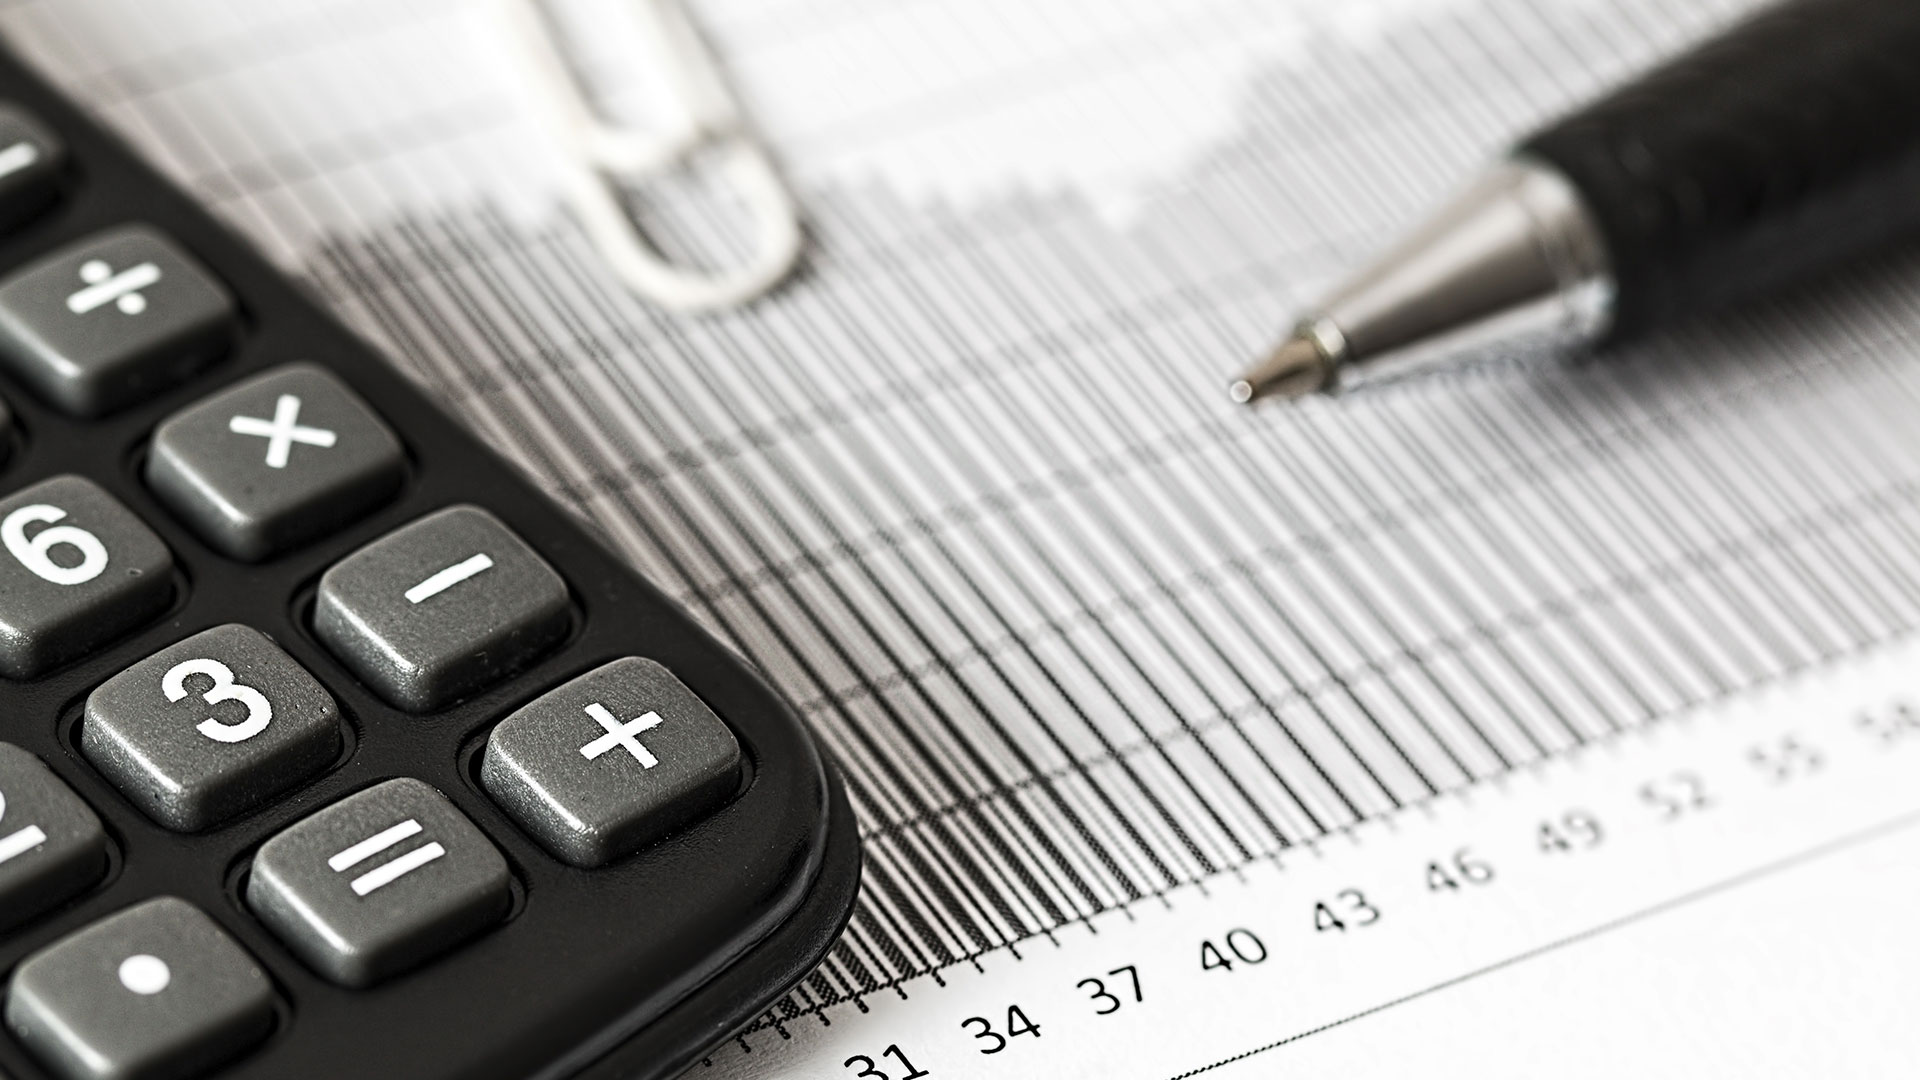 How HMRC conducts tax investigations